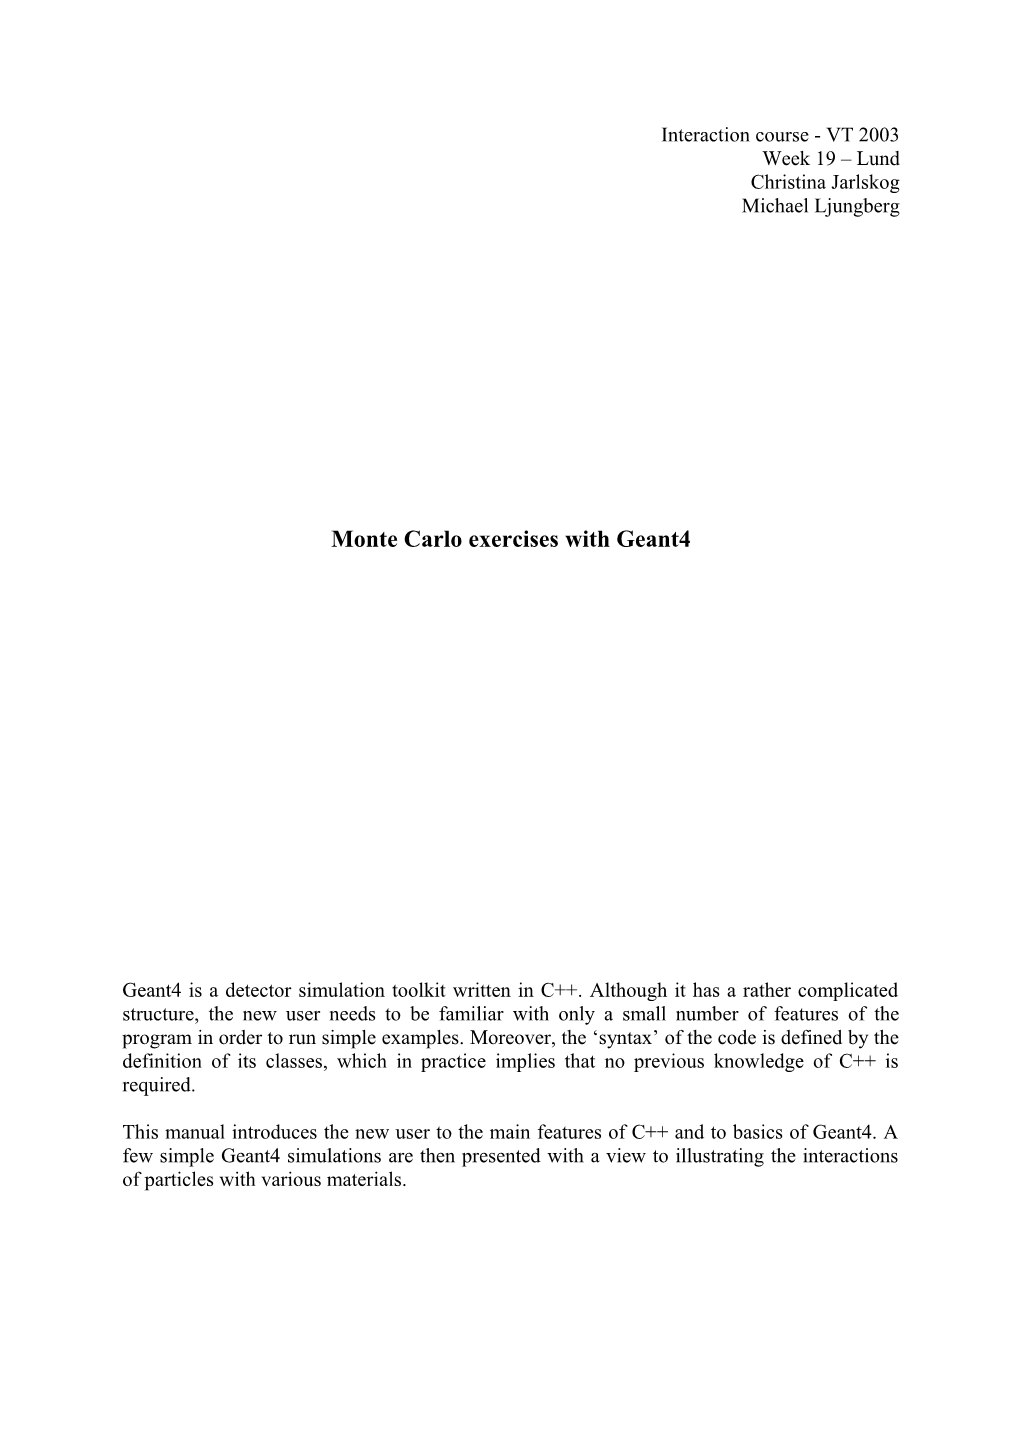 Monte Carlo Exercises with Geant4